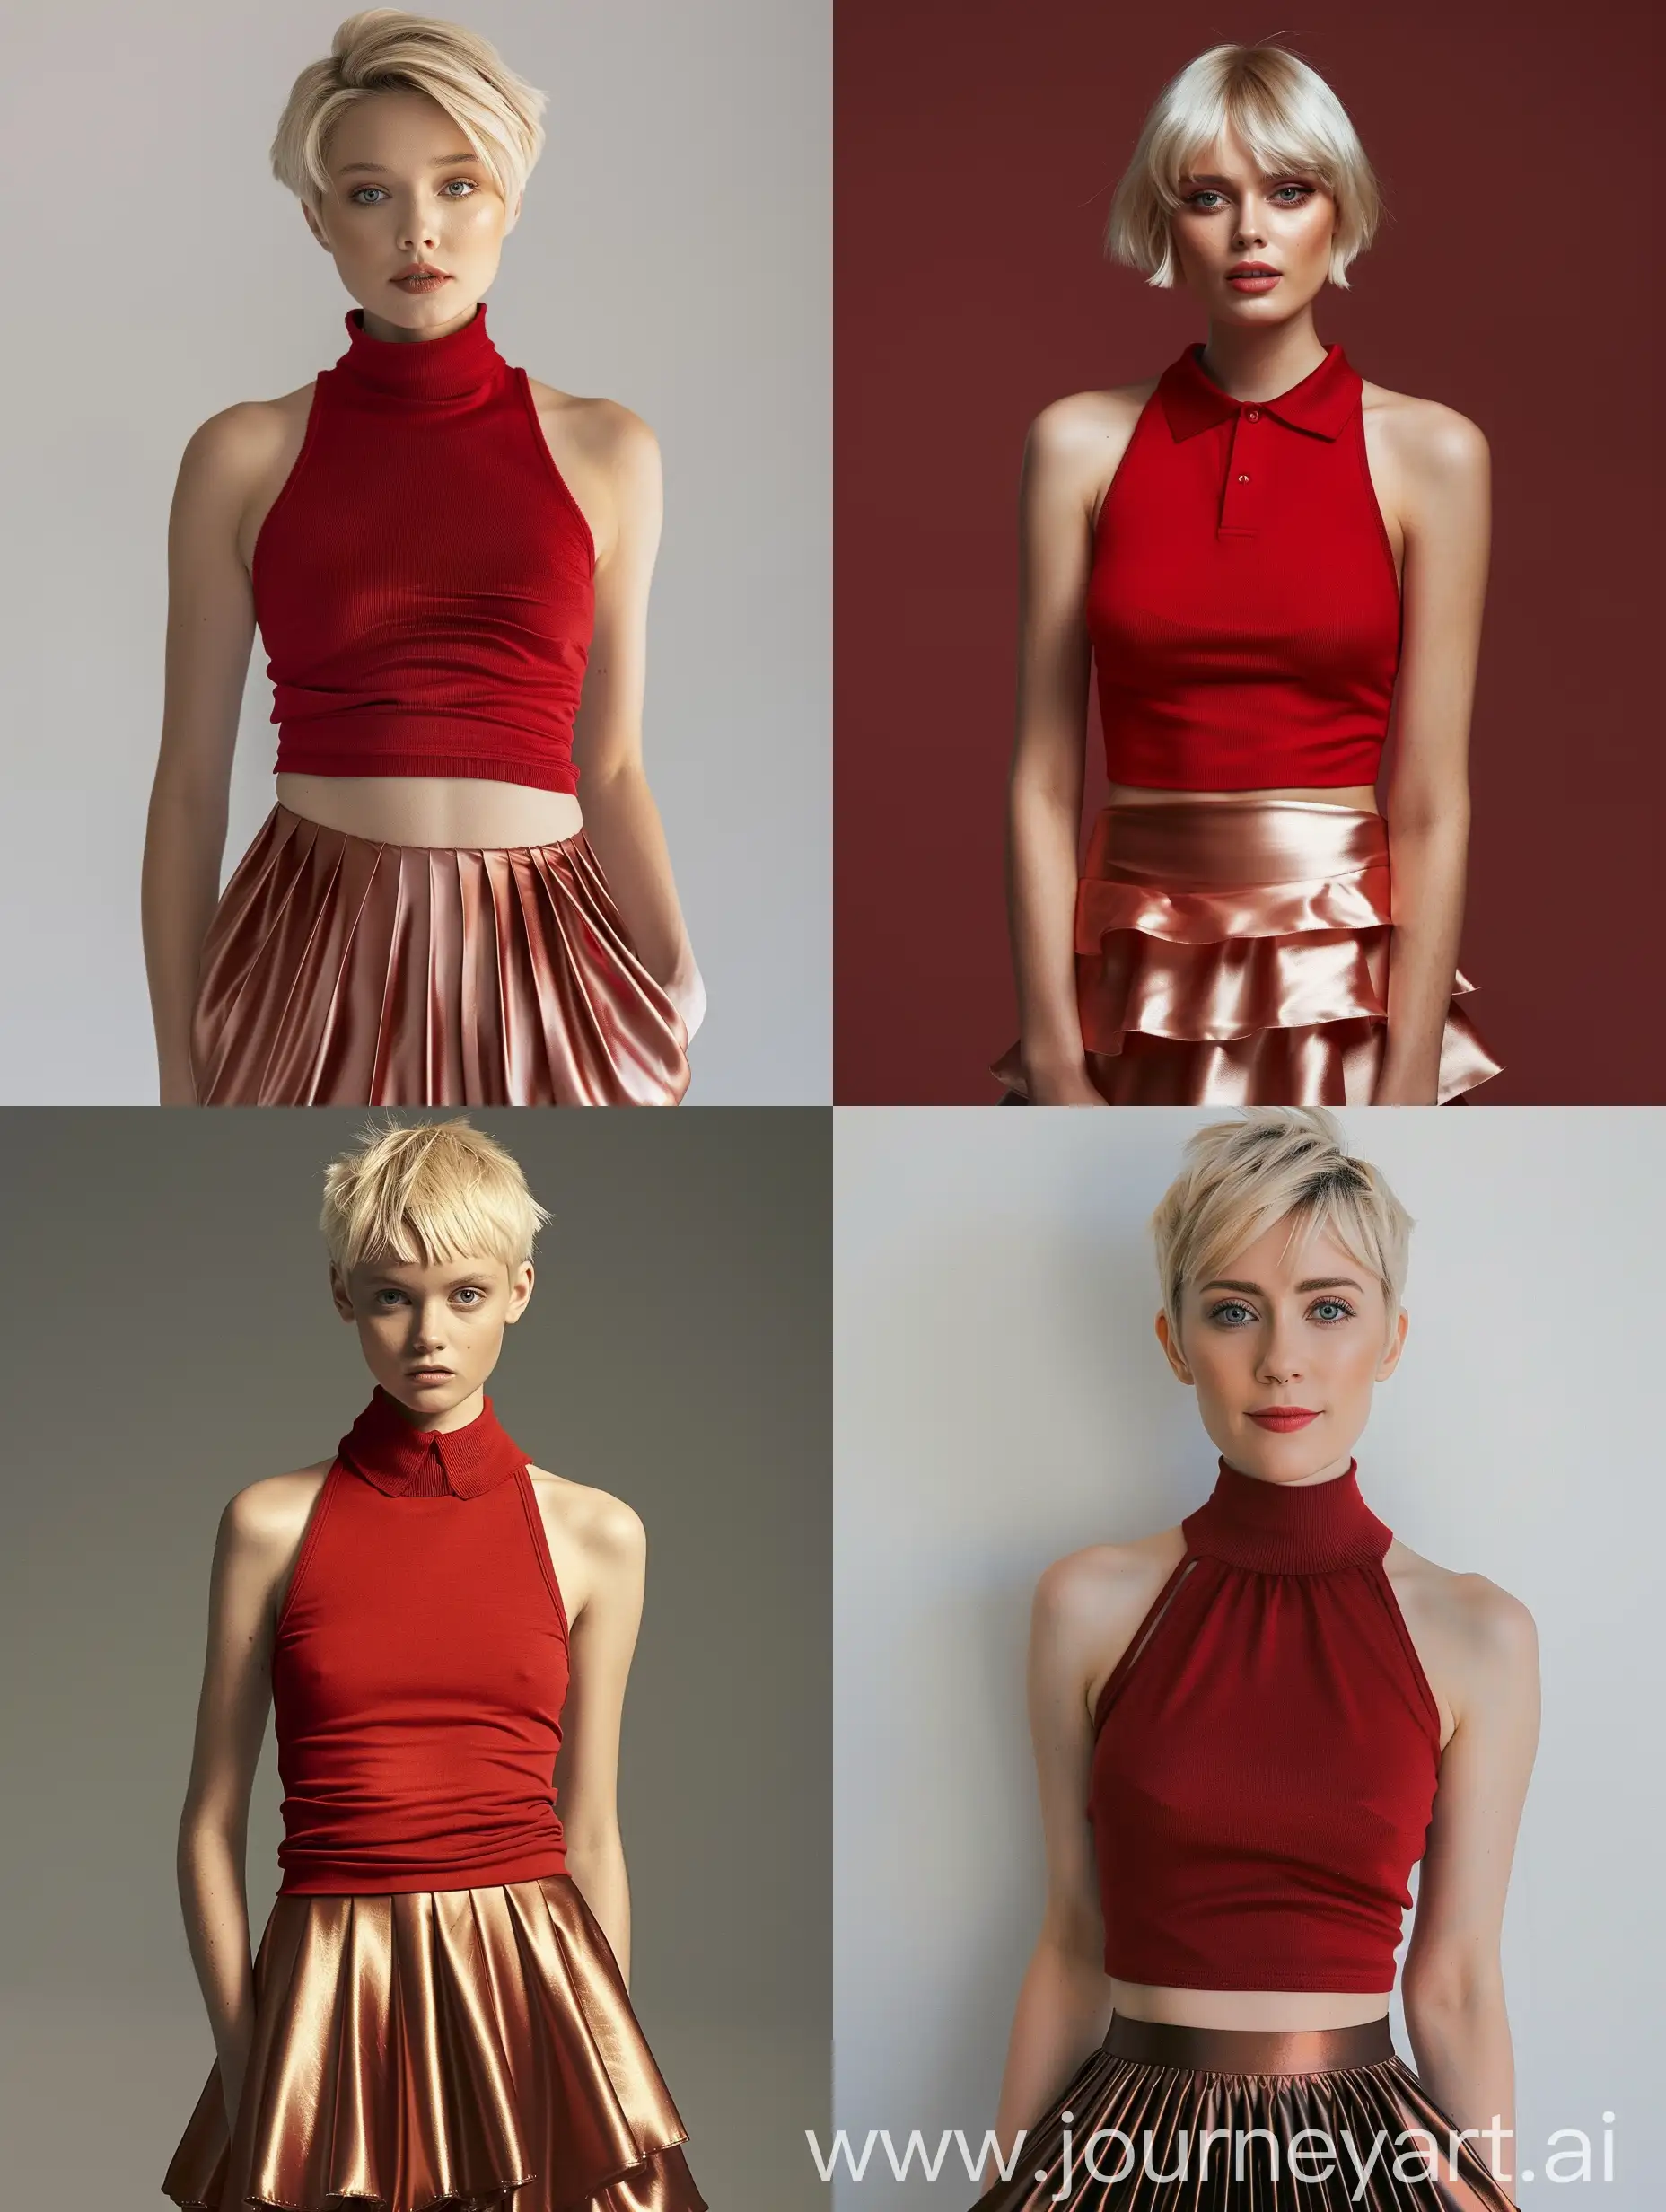 Fashionable-Blonde-Woman-in-Red-Halter-Polo-Neck-and-Satin-Layered-Mini-Skirt